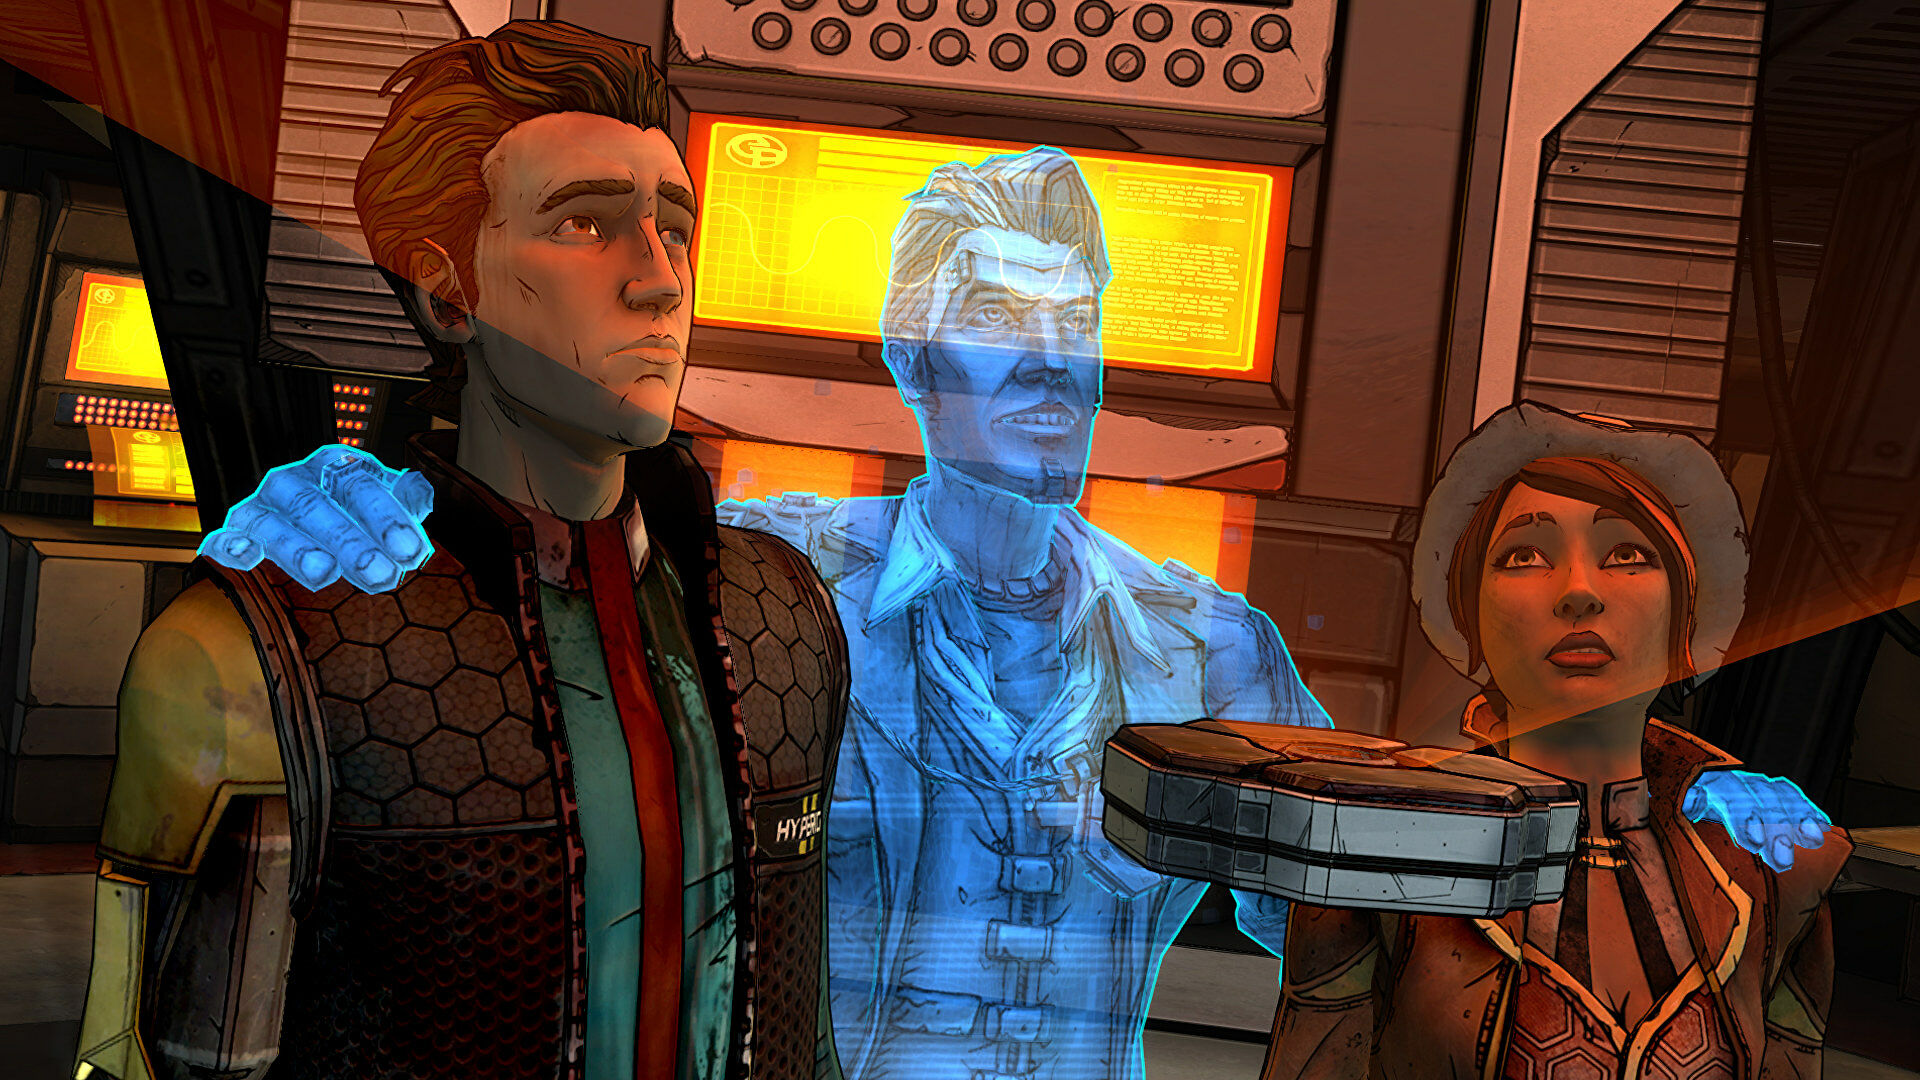 I double-checked and the original Tales From The Borderlands is still amazing